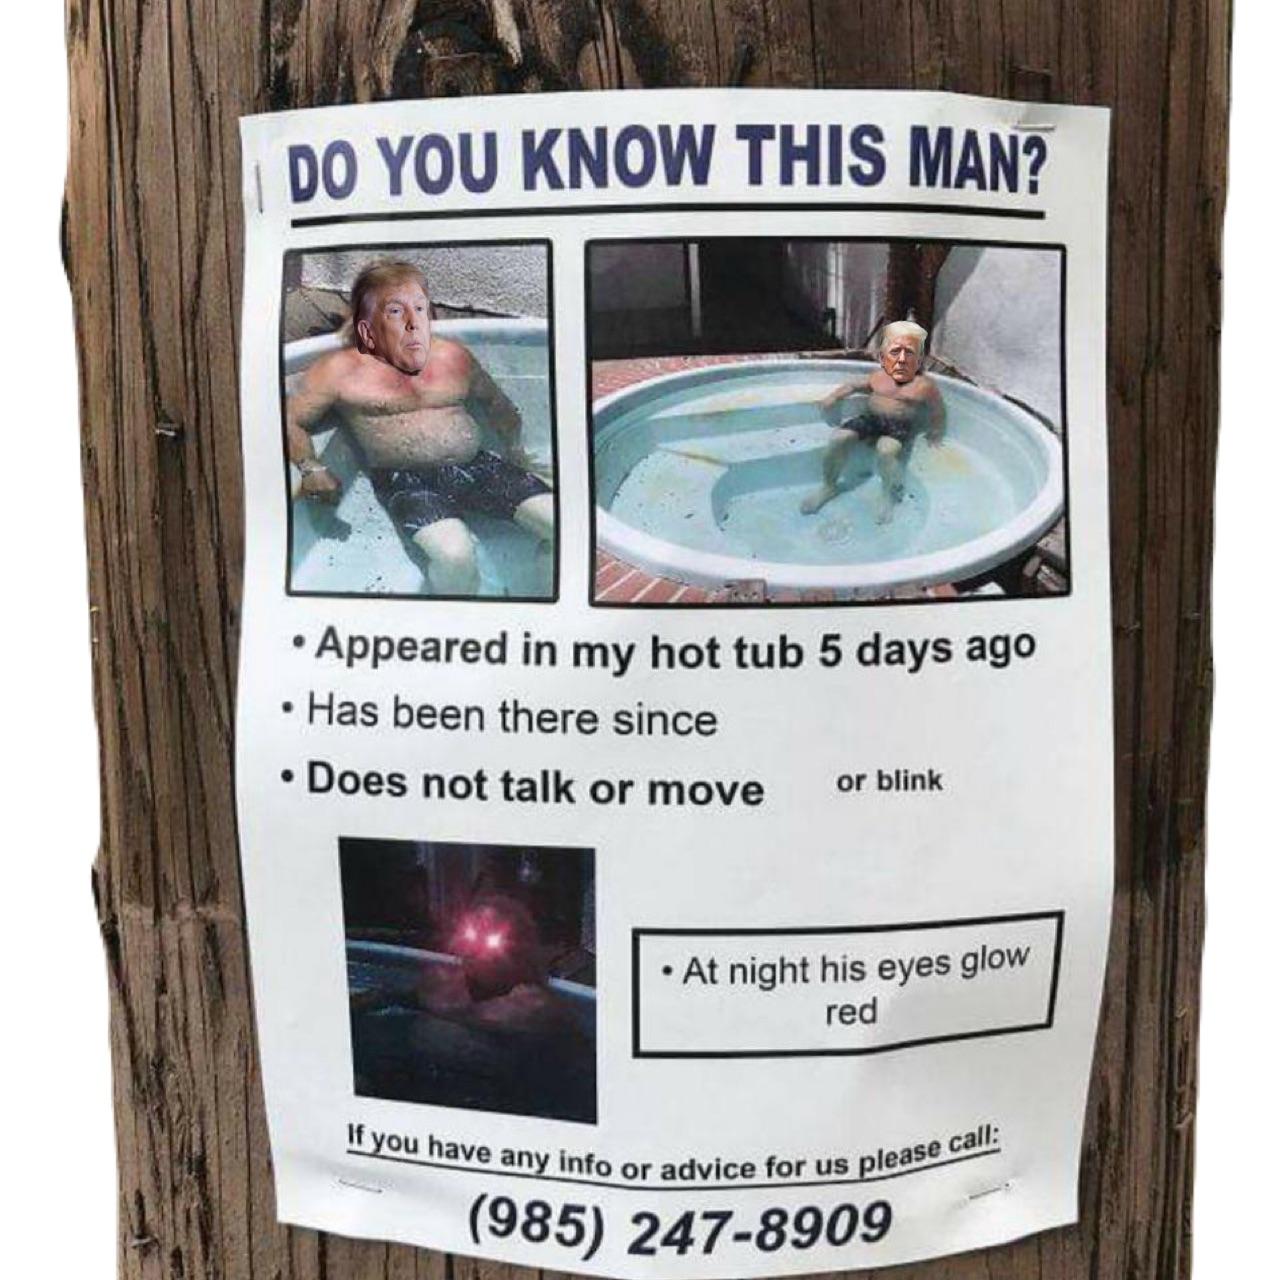 He’ll be full blown bonkers by election time. do you know this man hes been in my hot tub for 5 days trump dank memes